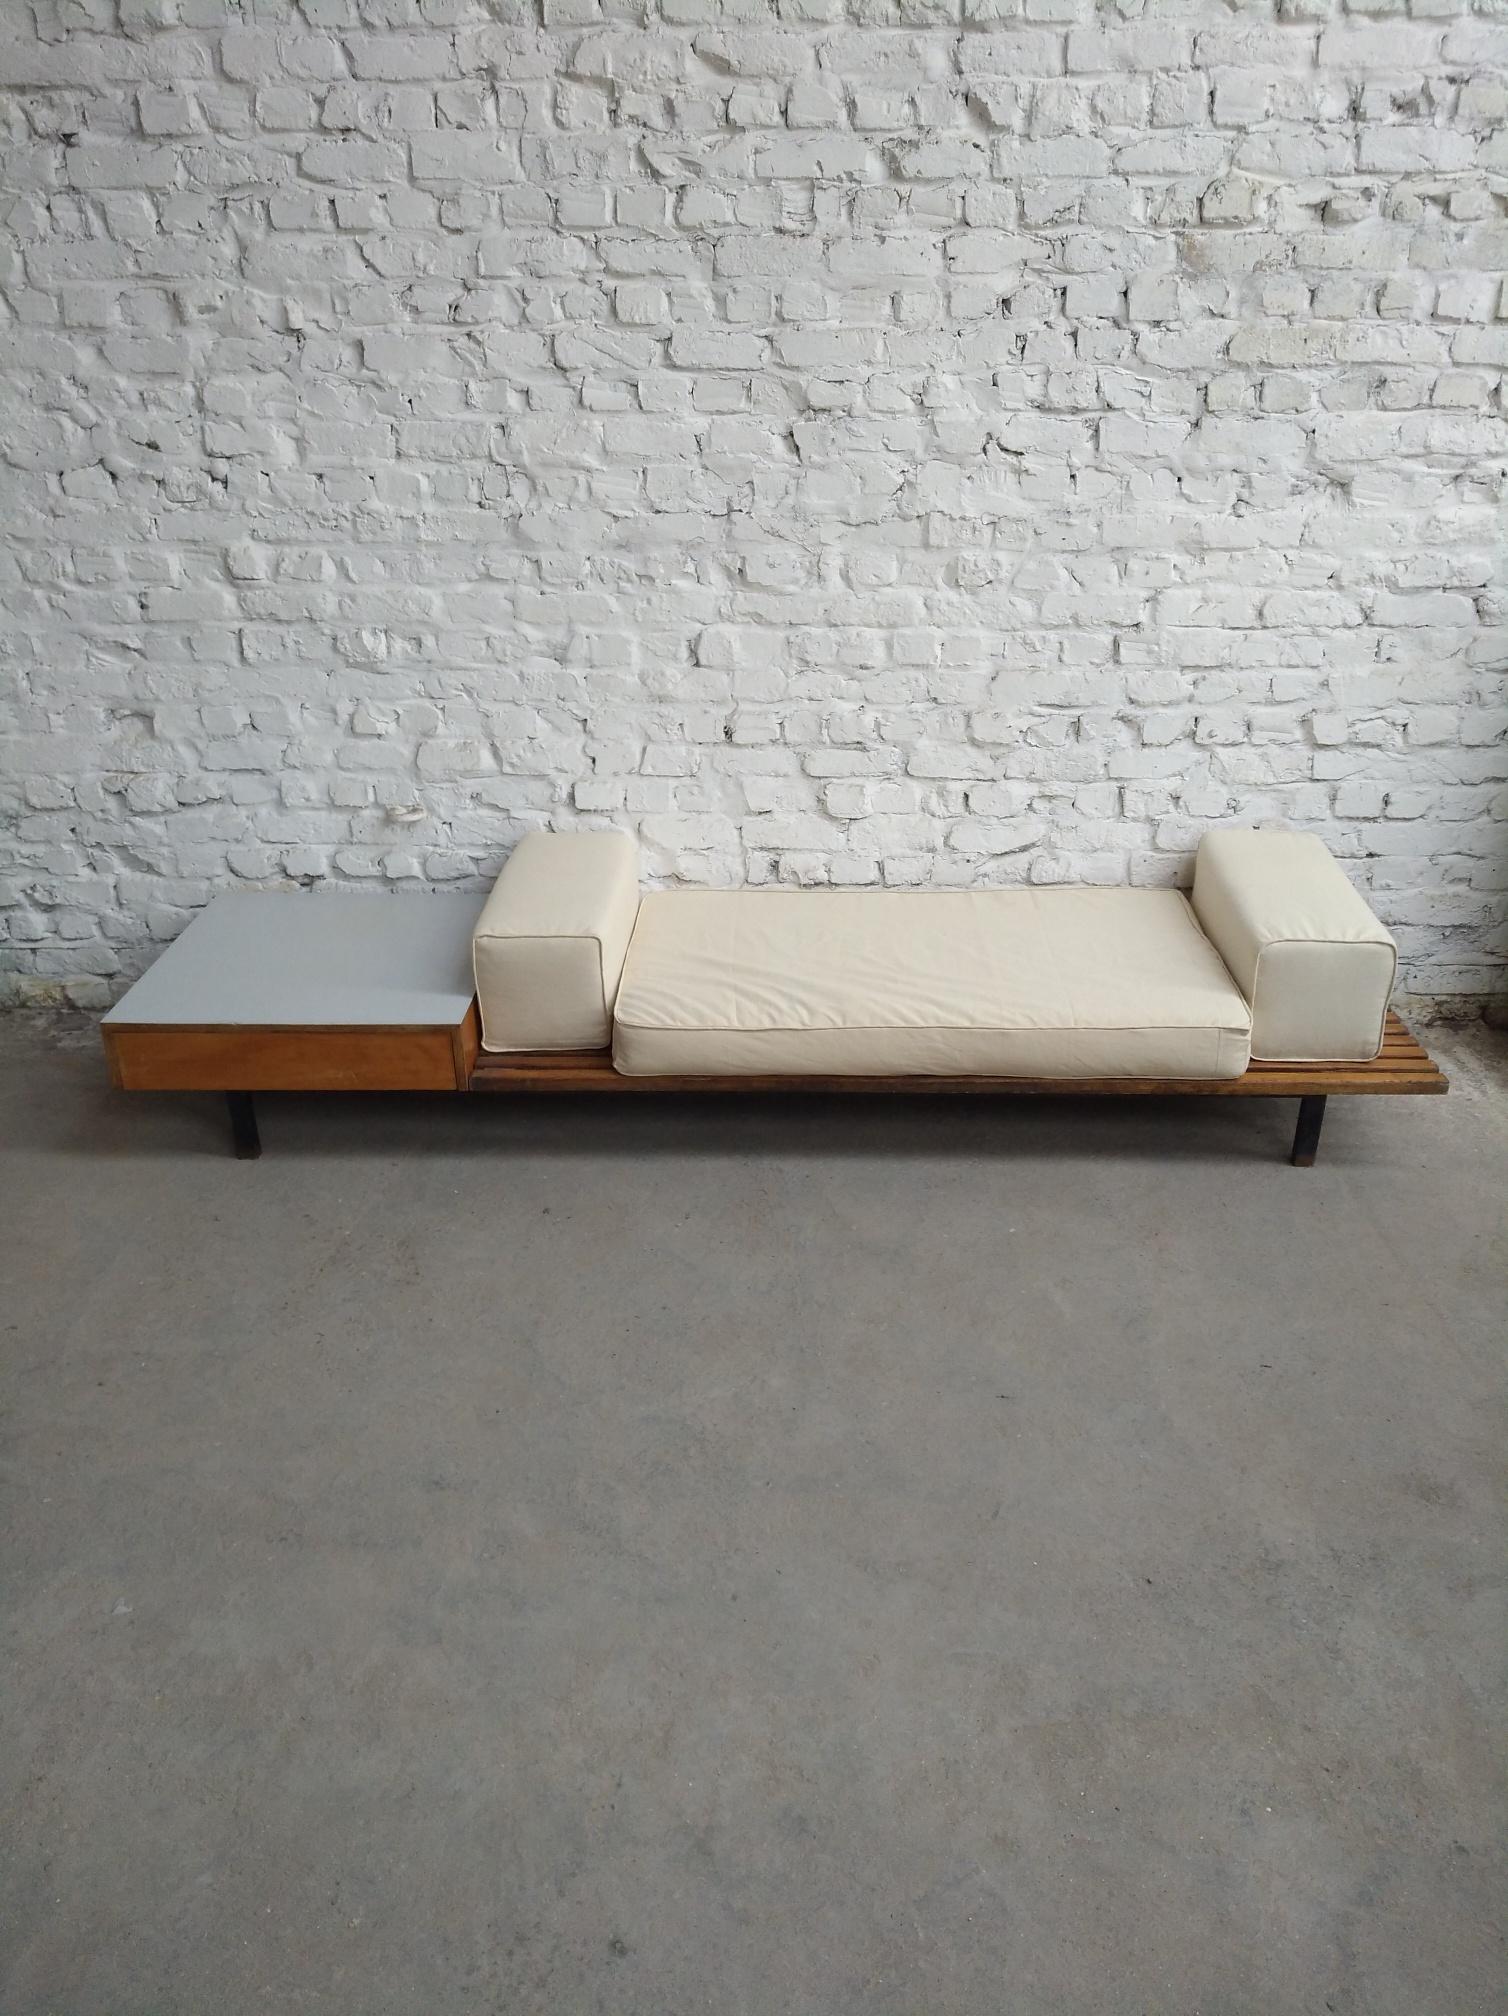 Charlotte Perriand Cansado bench daybed Steph Simon France 1959 For Sale 7